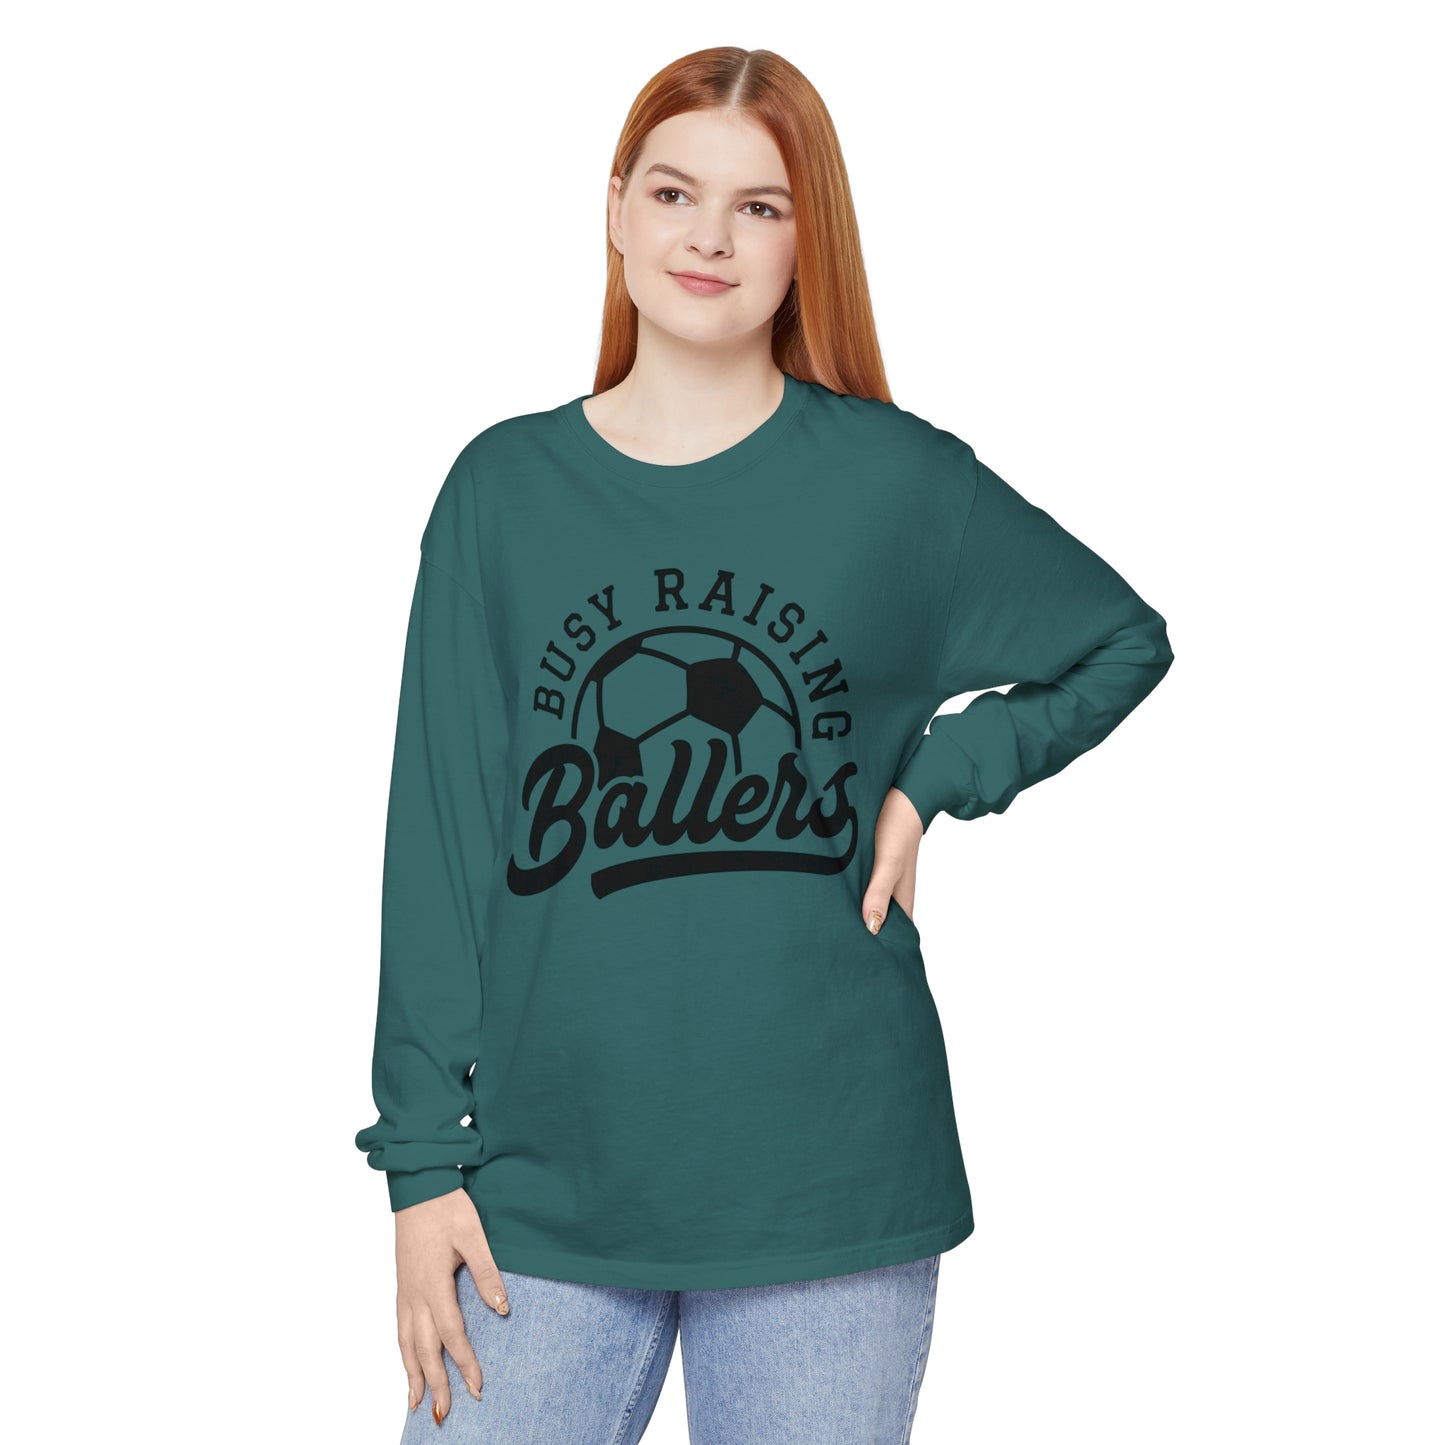 Busy Raising Ballers Soccer Mom and Dad Long Sleeve T-Shirt